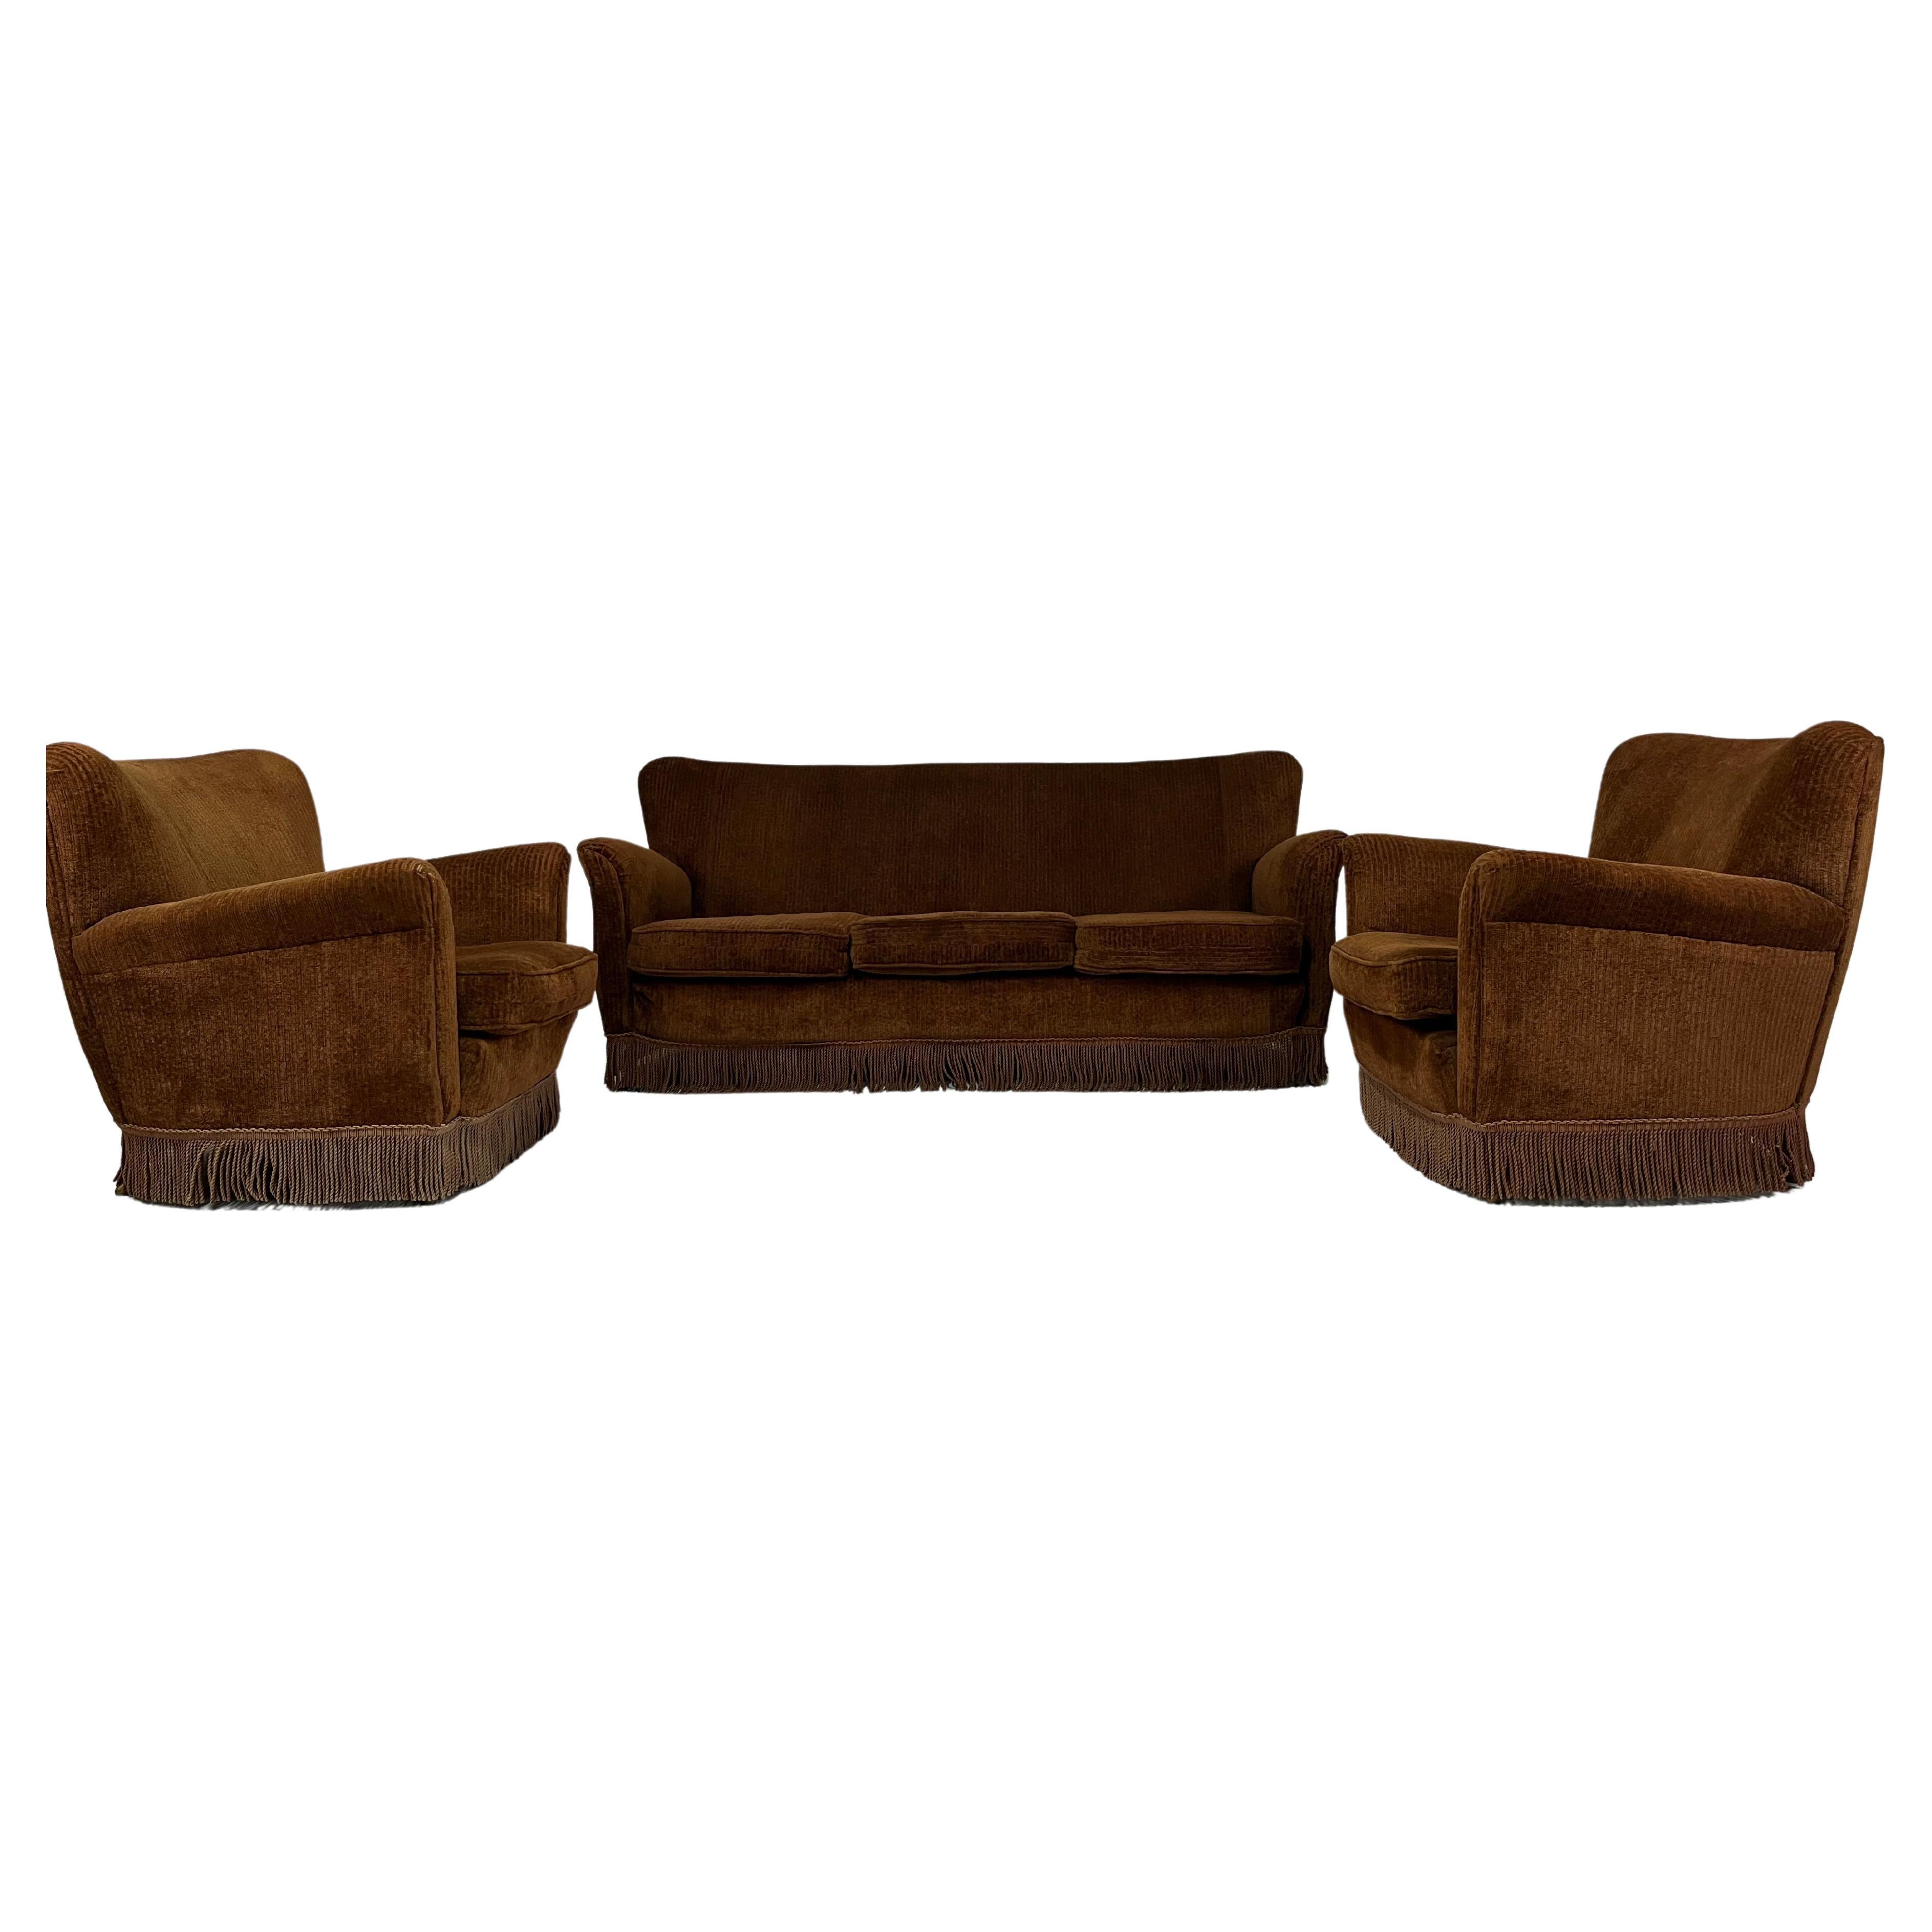 Set consisting of one sofa and two ISA velvet armchairs For Sale